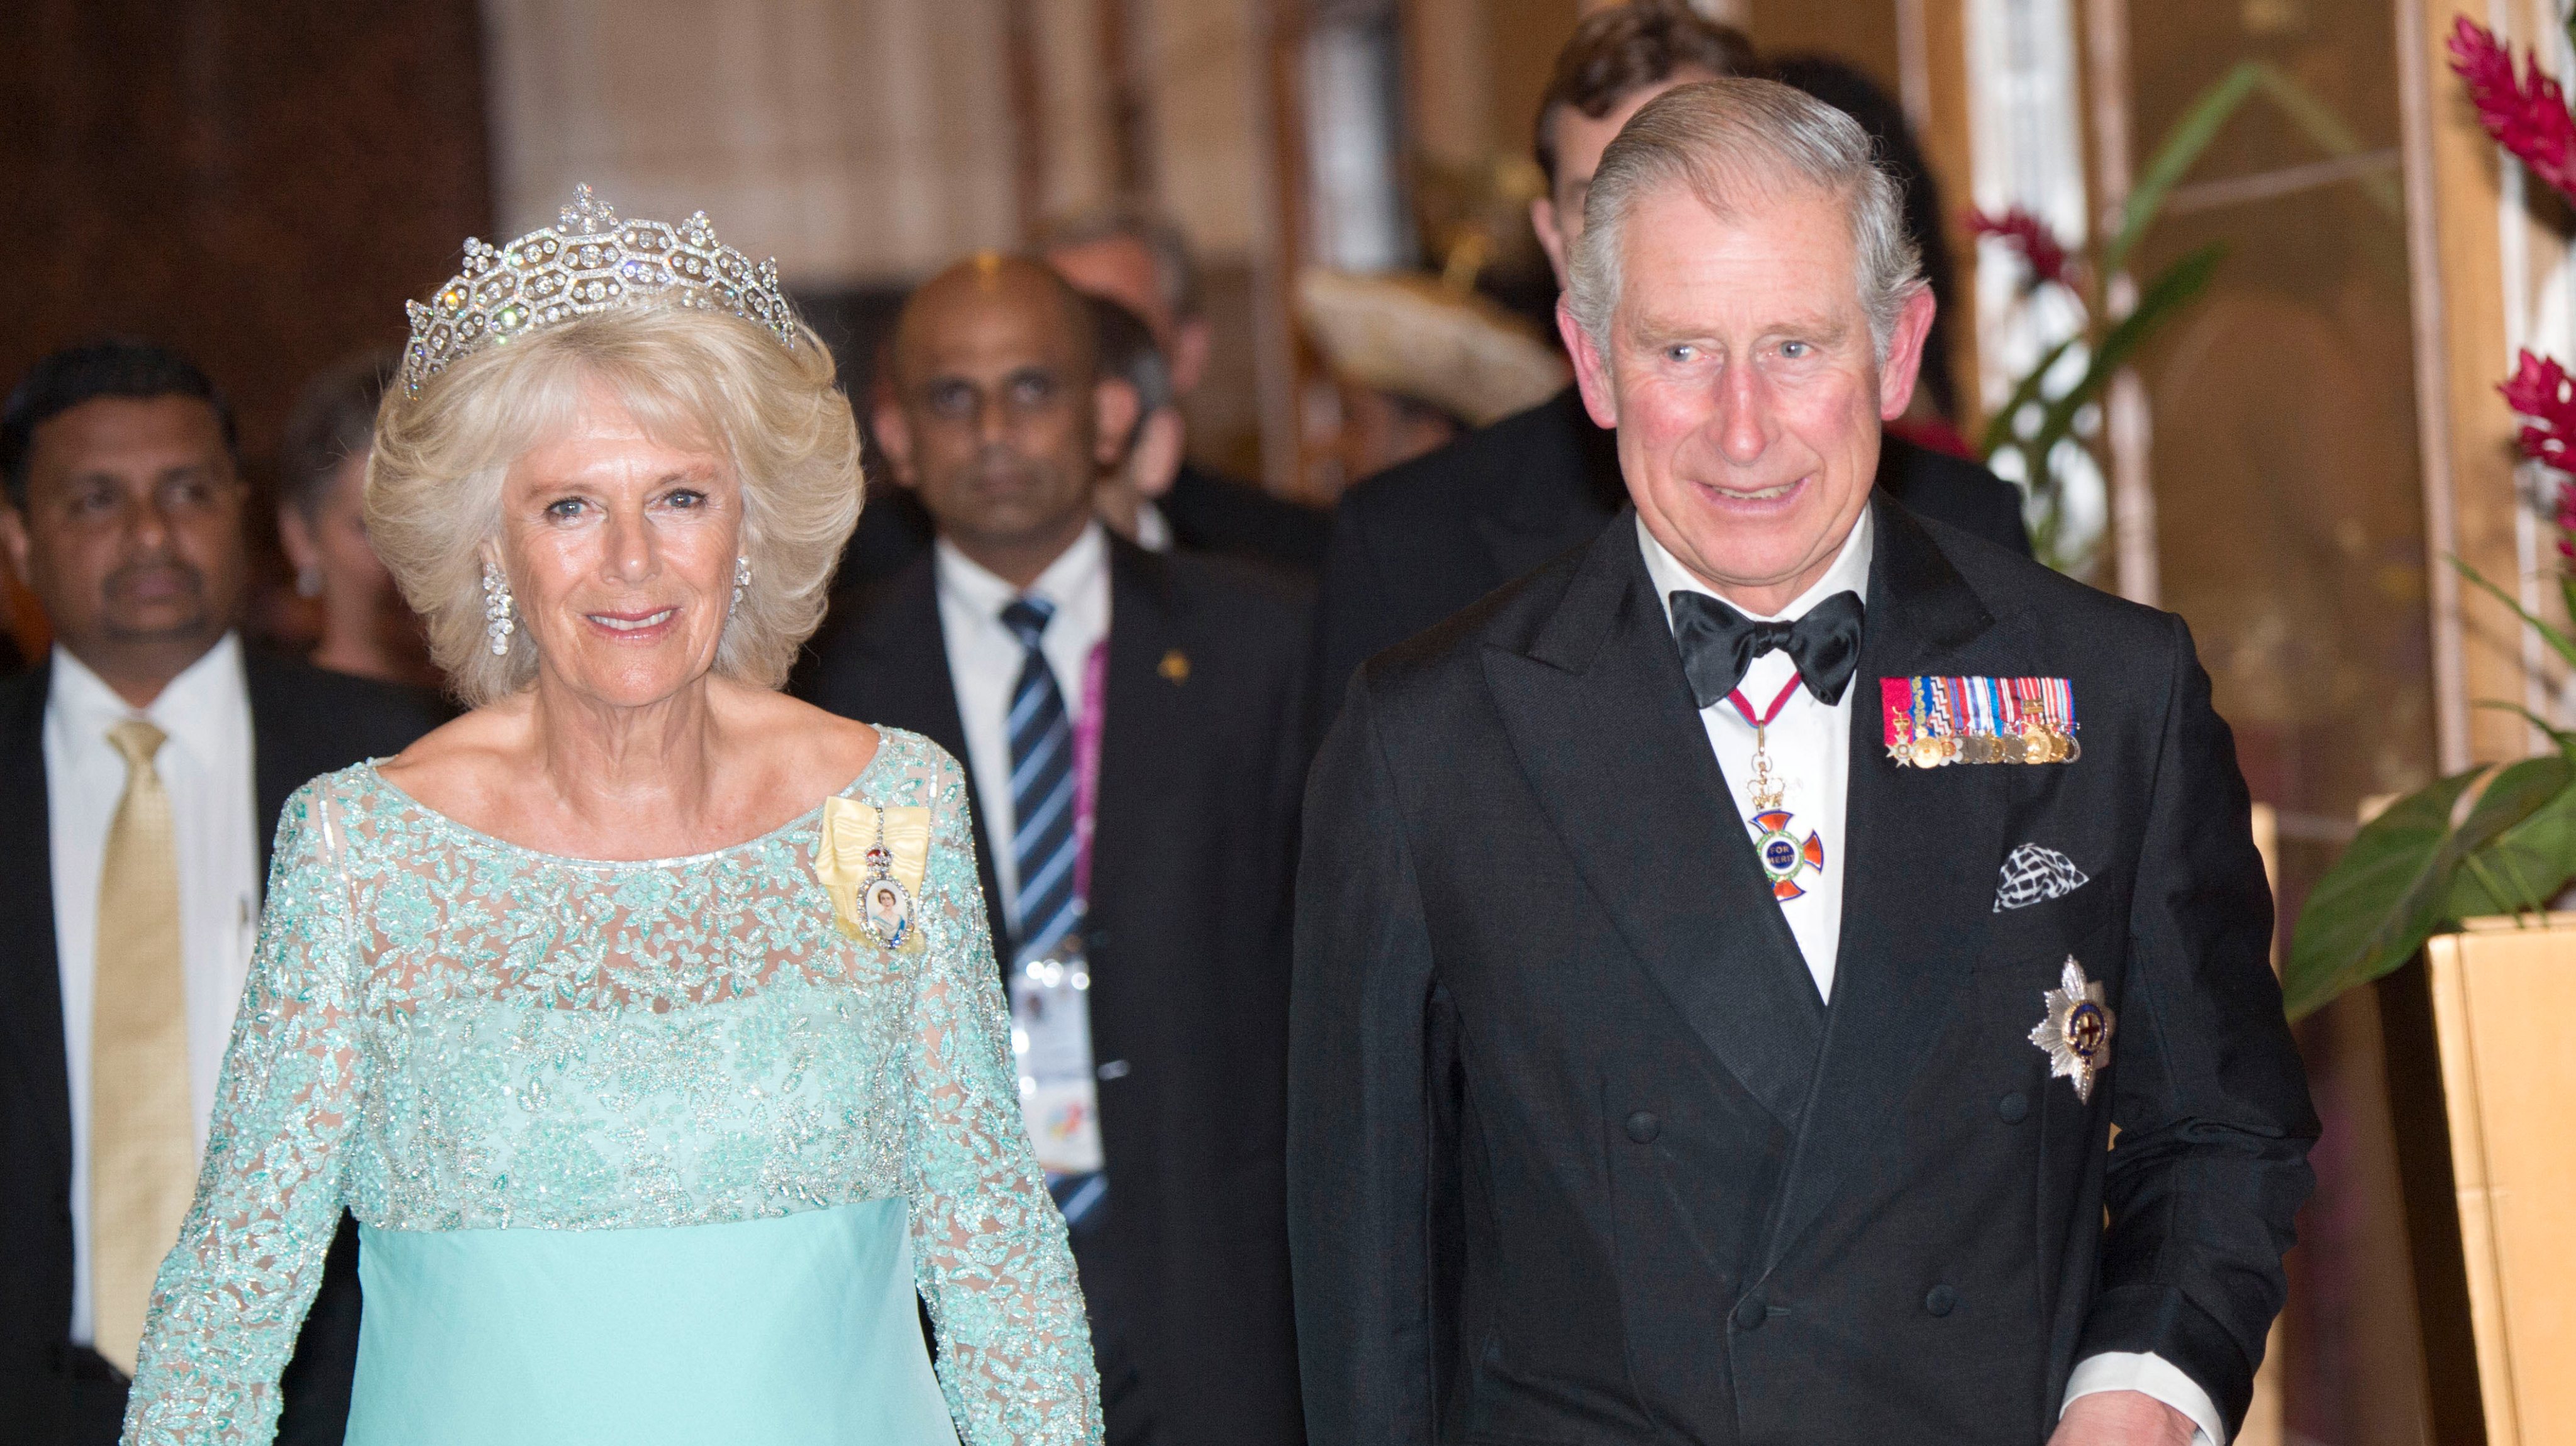 The Prince Of Wales And Duchess Of Cornwall Visit Sri Lanka - Day 2